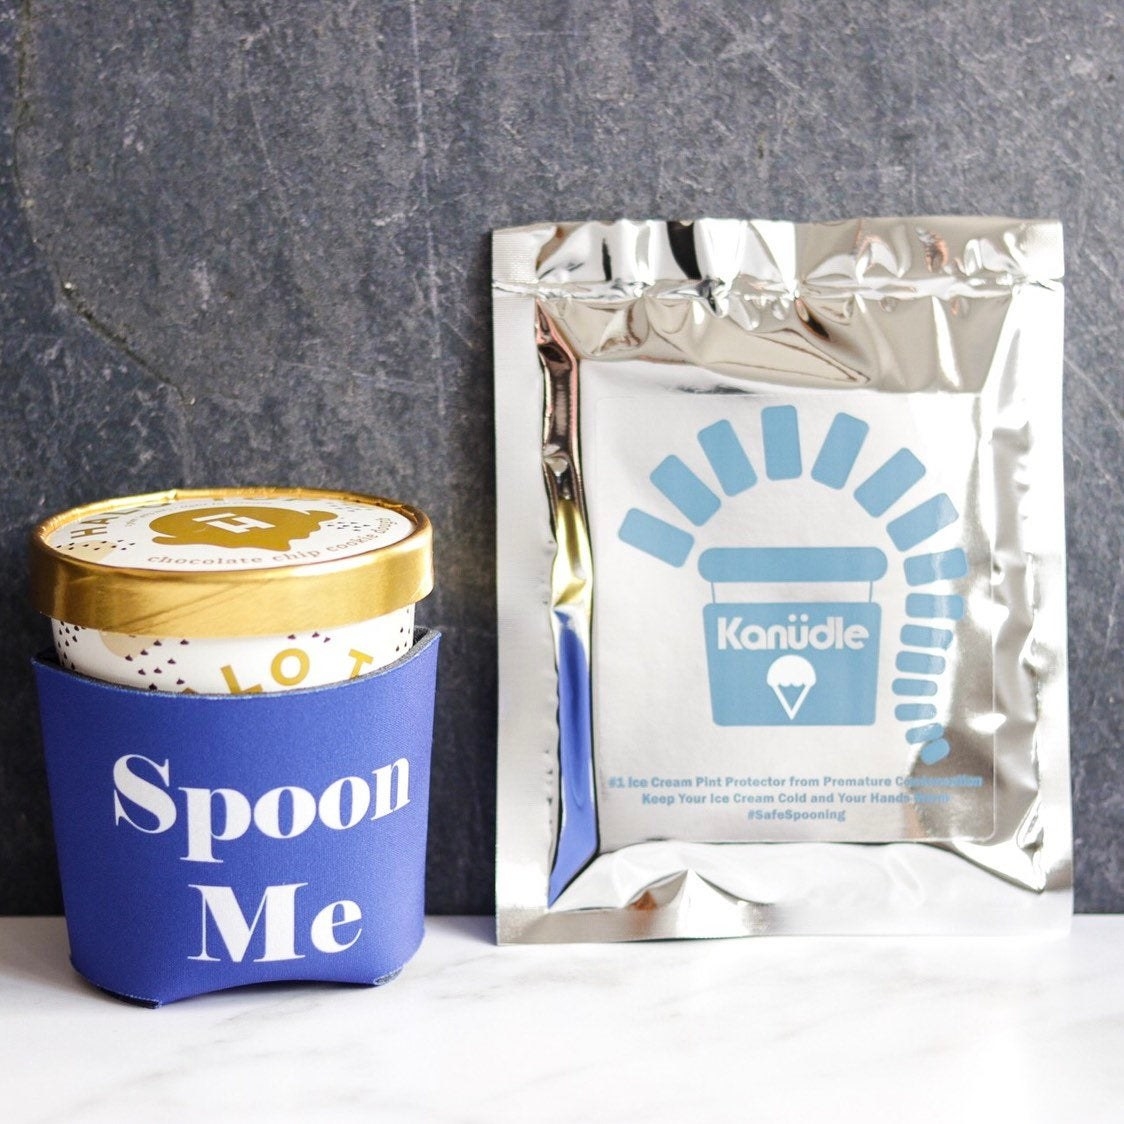 A pint of Halo Top ice cream is inside a large blue thermal jacket that says &quot;spoon me&quot;